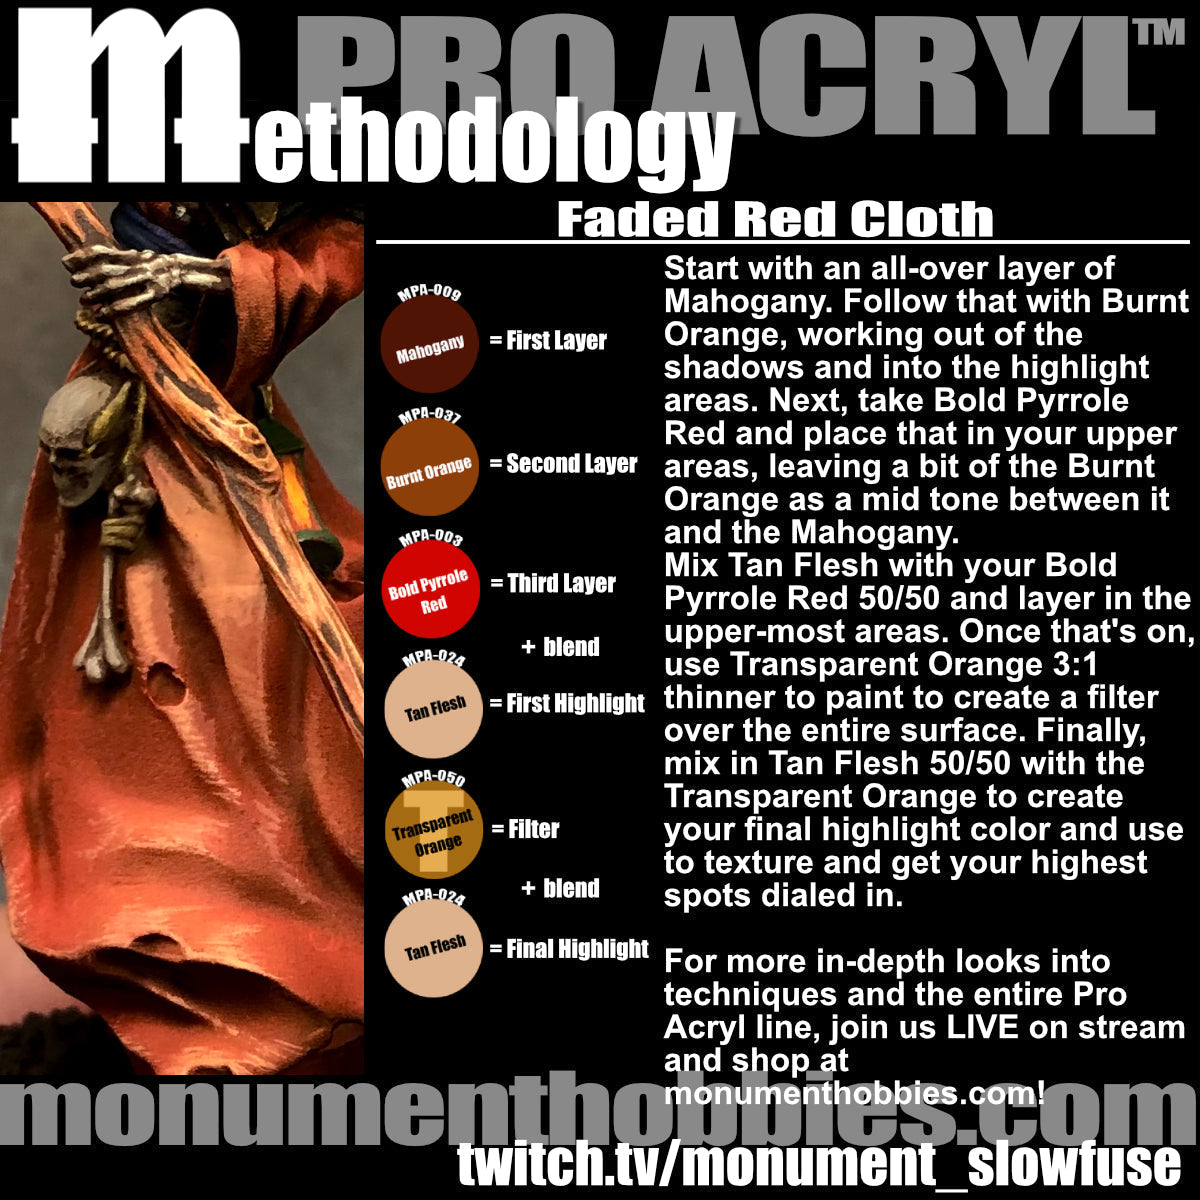 Methodology #24 - Faded Red Cloth!